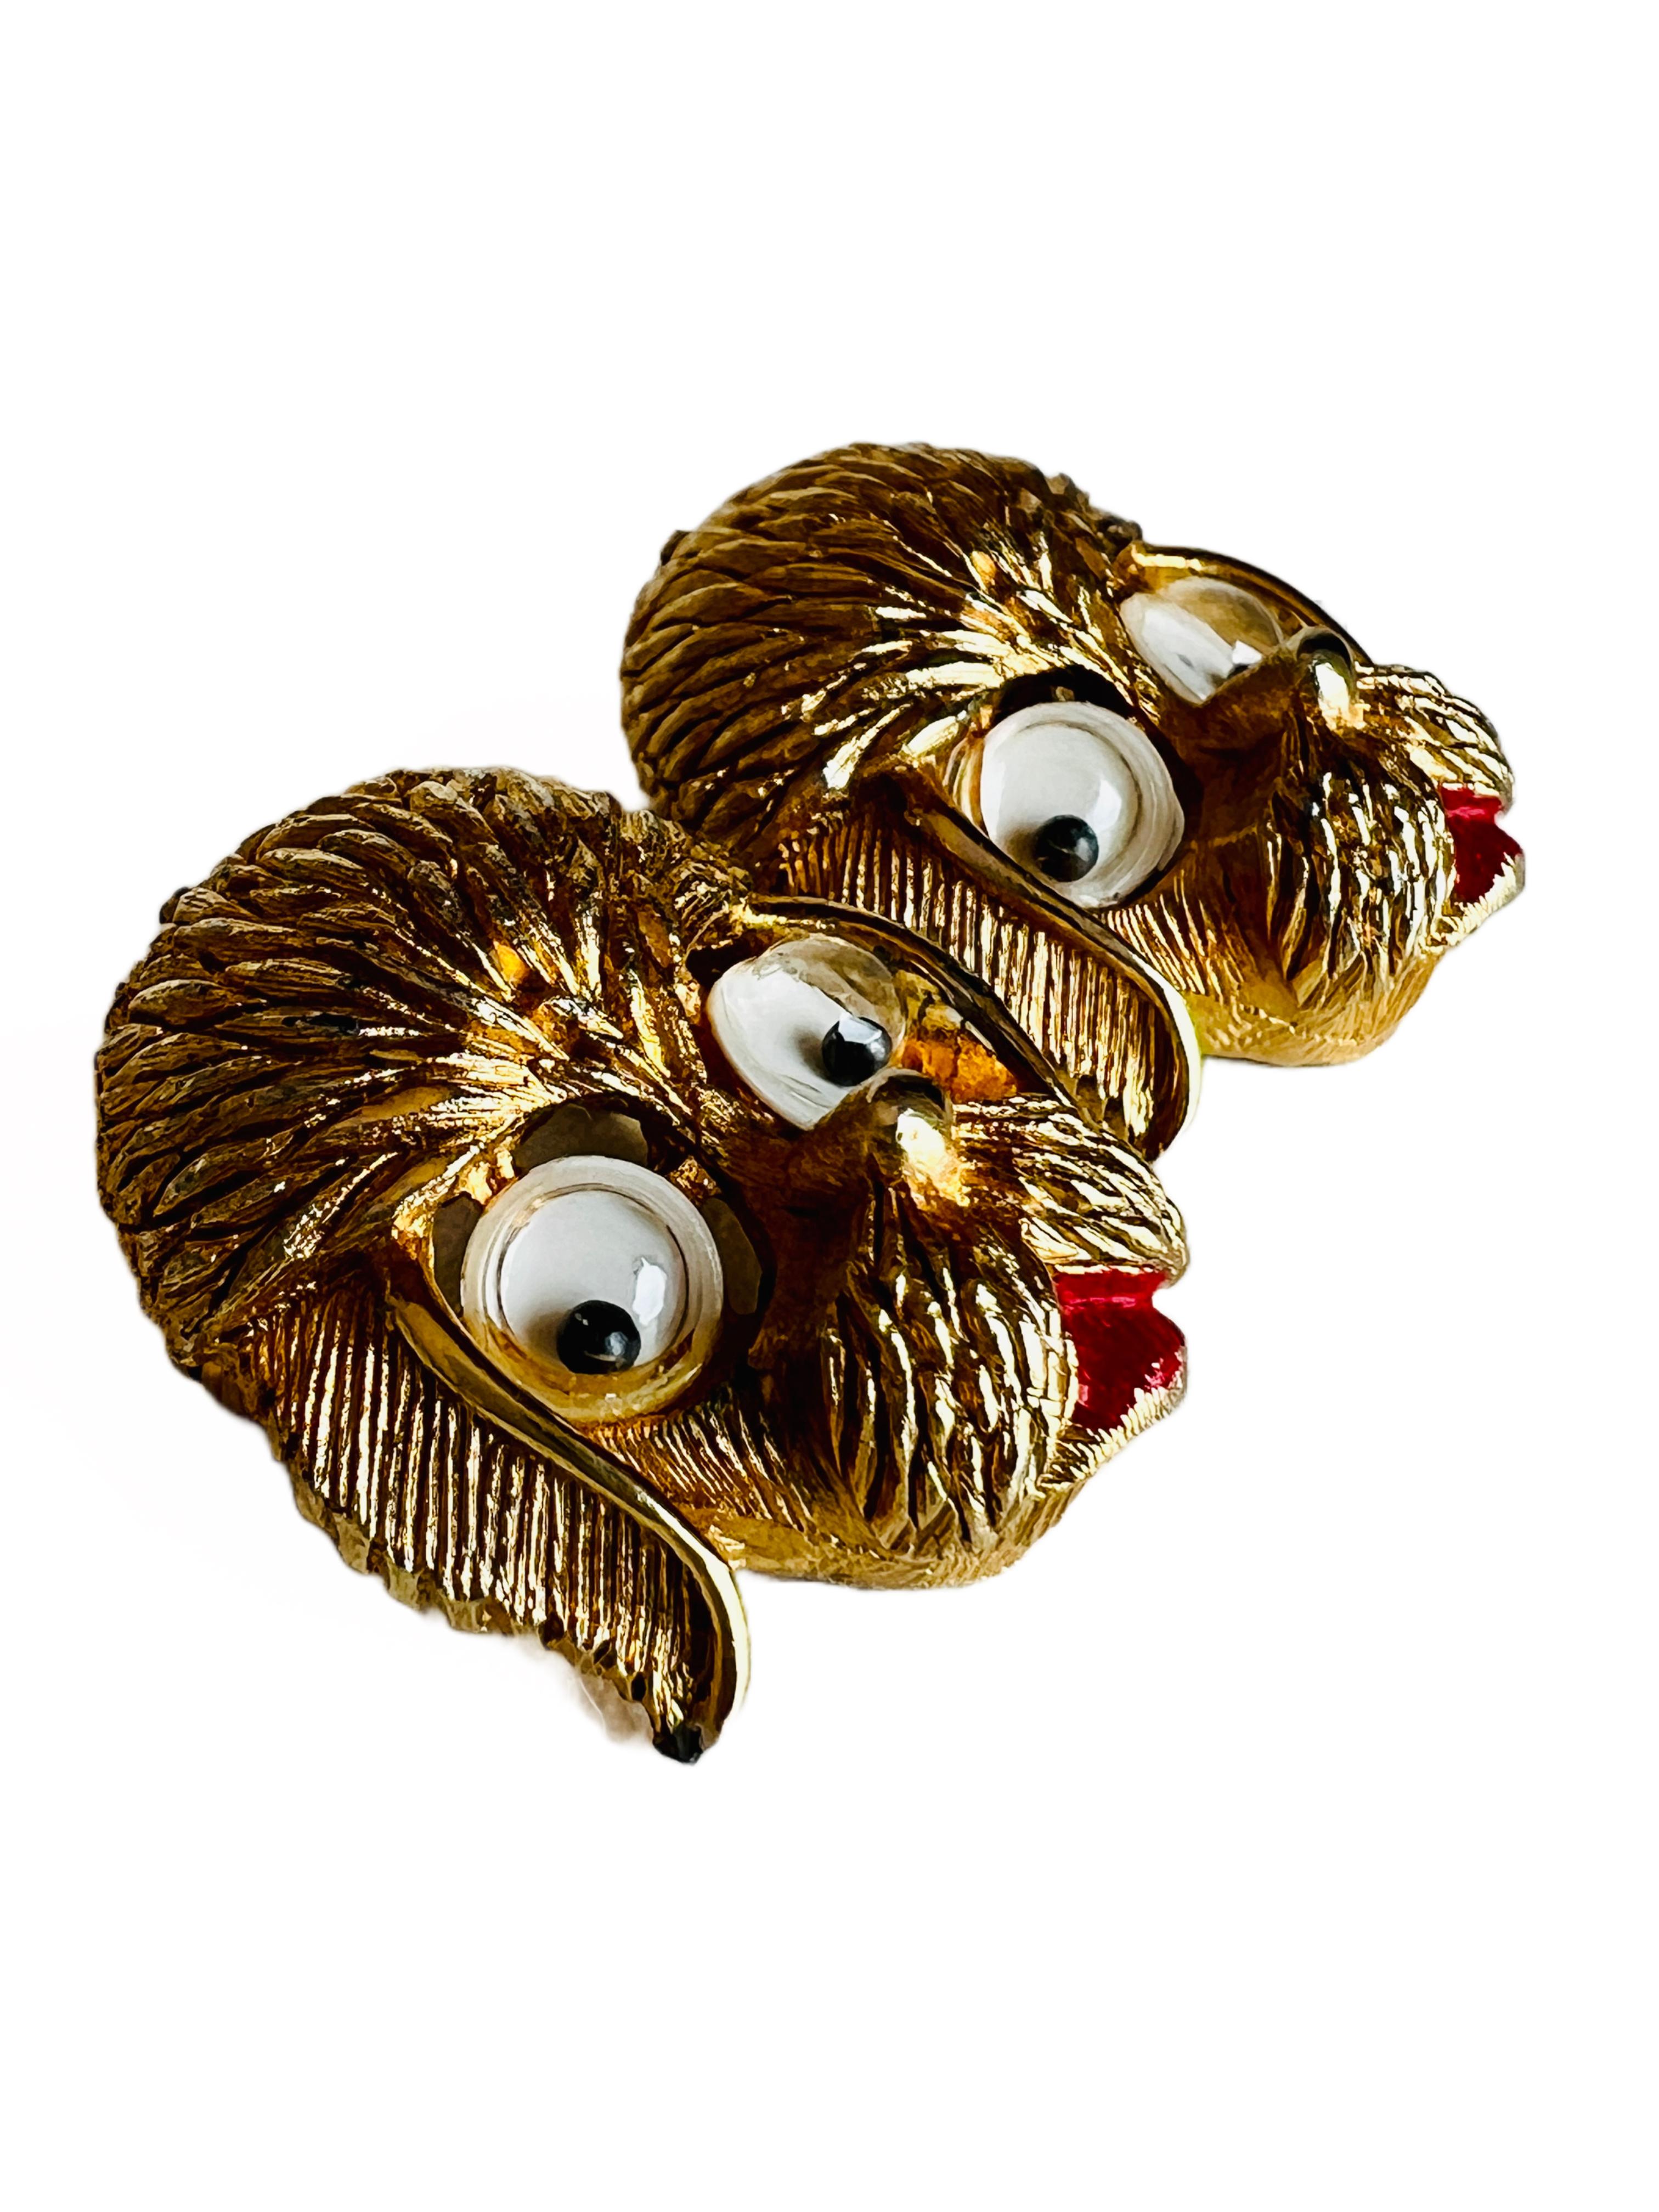 Pair of Gold Tone Googly Moving Eyes Figural Puppy Dog Brooch Pins W/ Red Mouth In Good Condition For Sale In Sausalito, CA